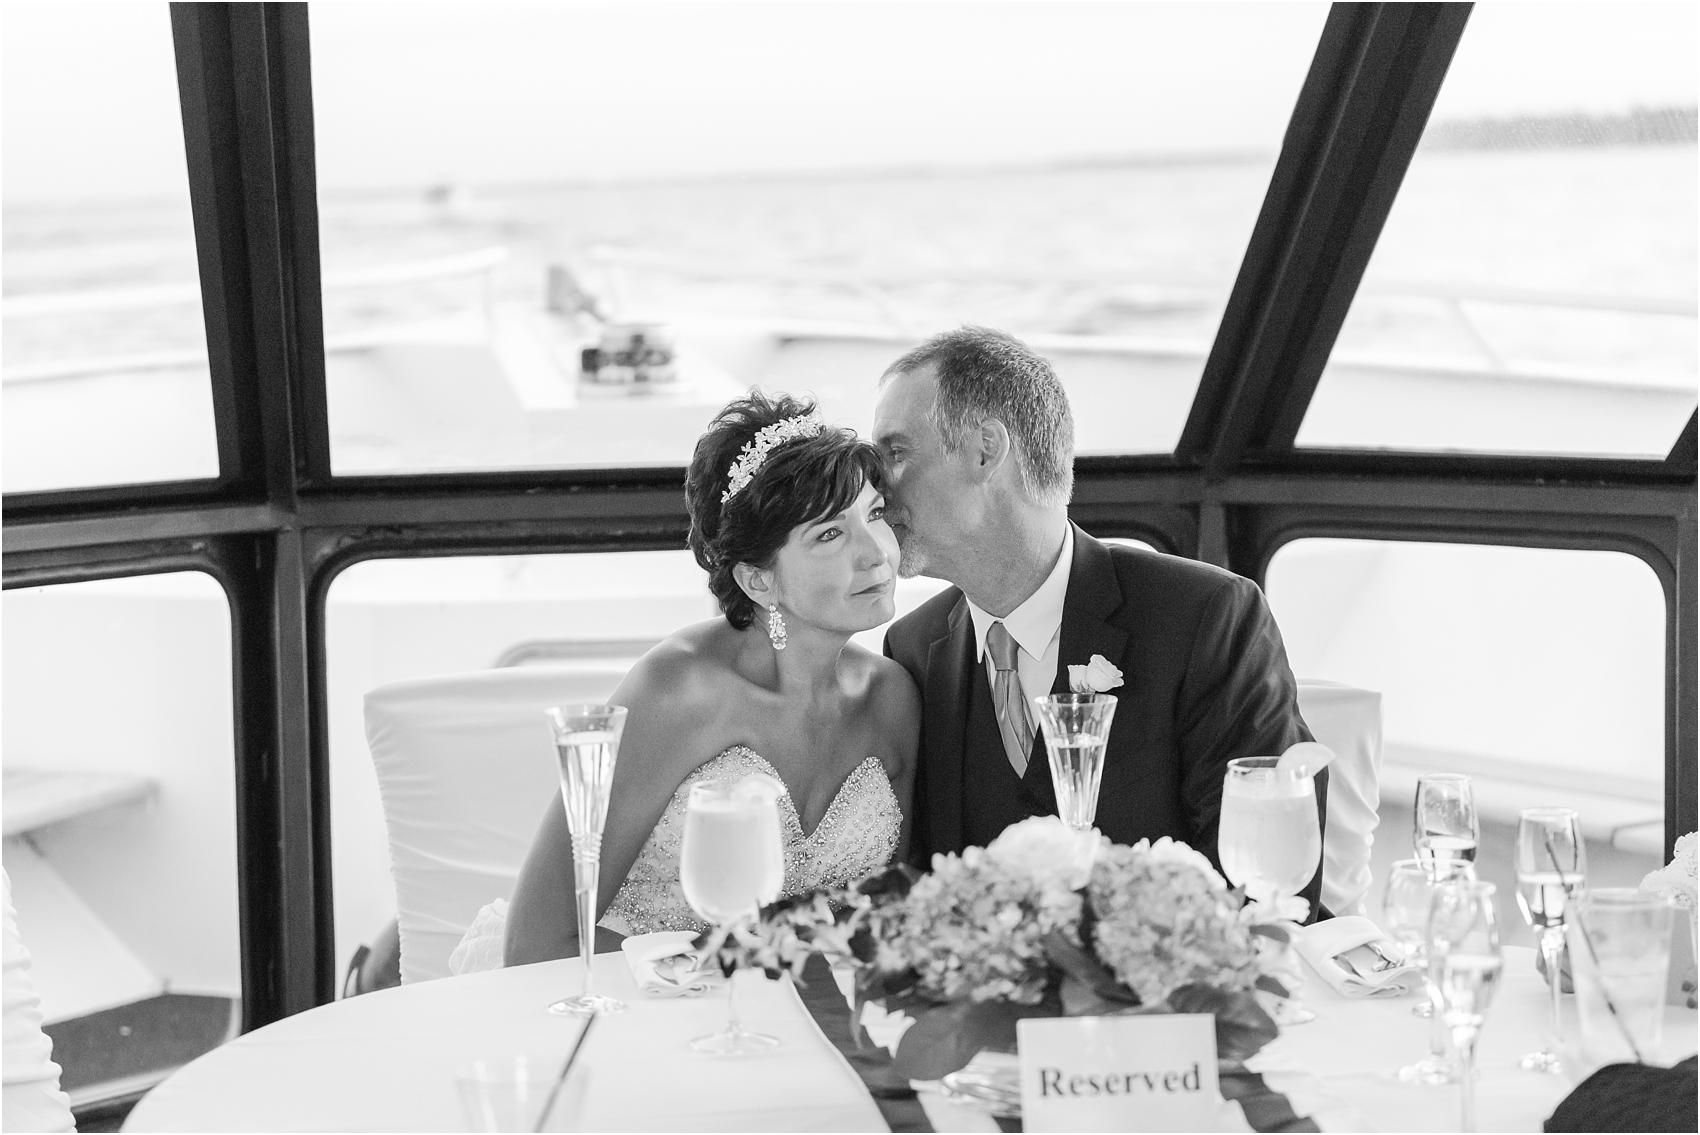 classic-natuical-inspired-wedding-photos-on-infinity-ovation-yacht-in-st-clair-shores-mi-by-courtney-carolyn-photography_0095.jpg